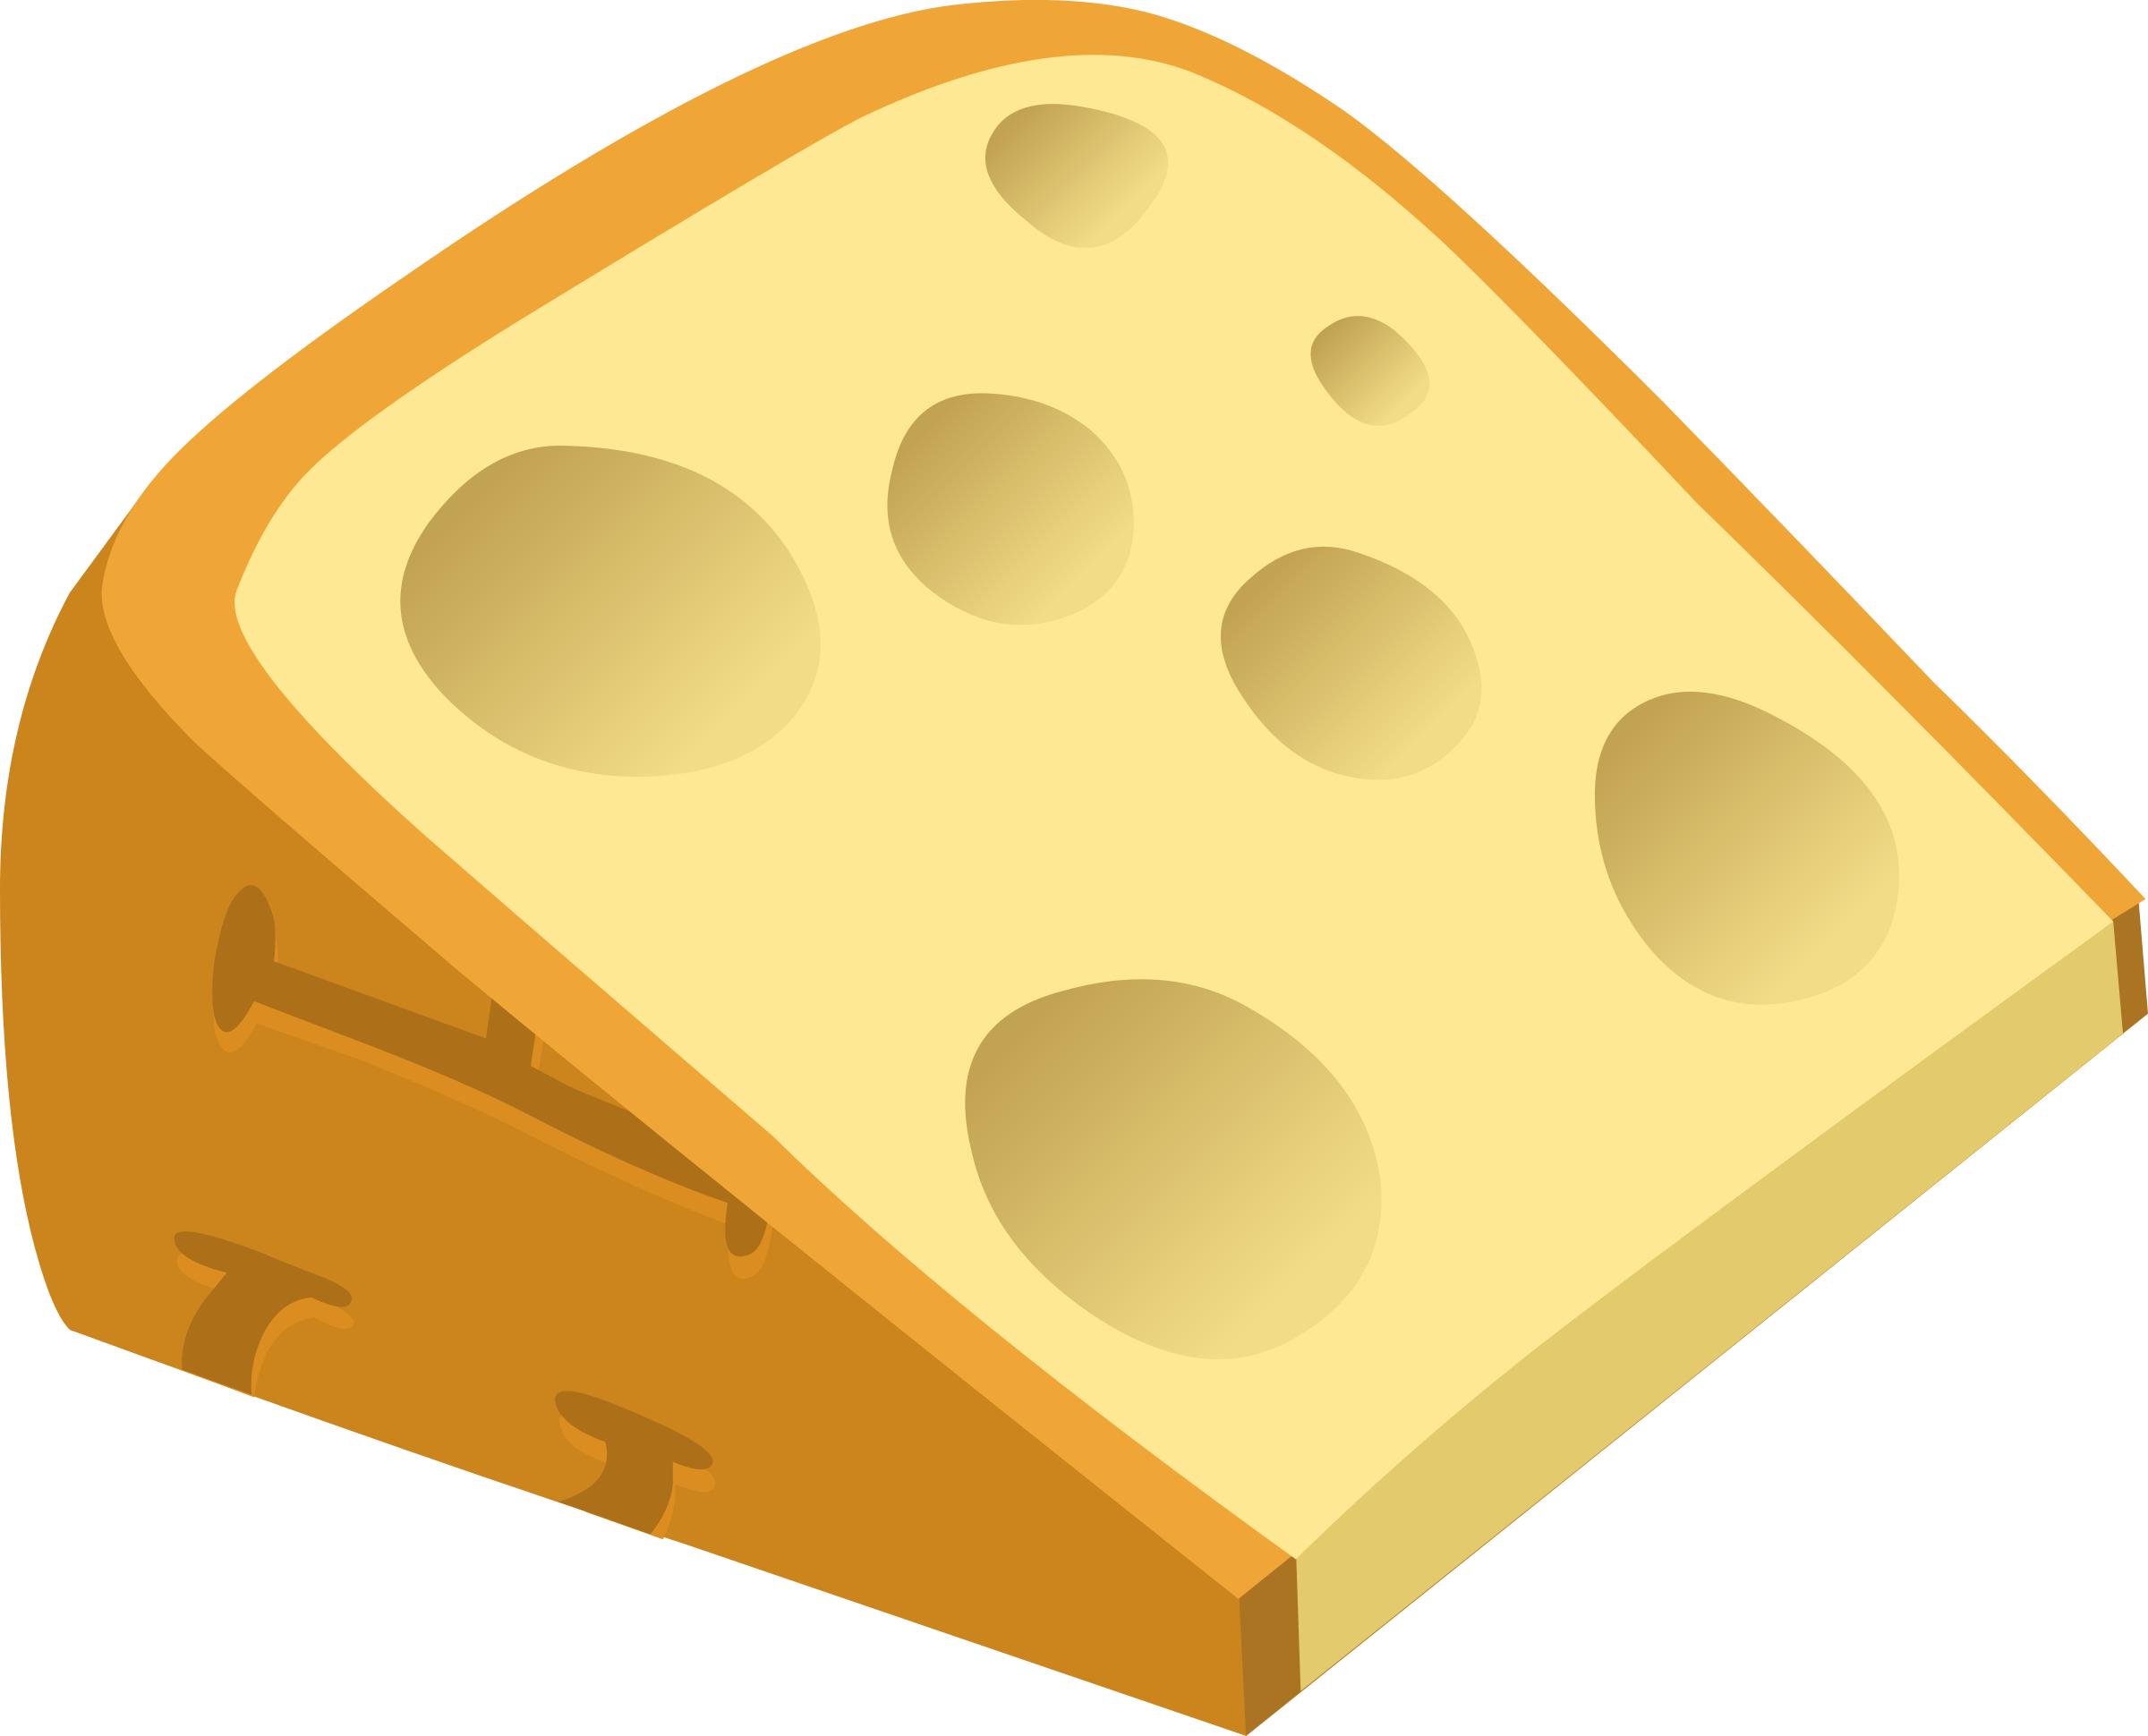 Food Fancy Cheese icons